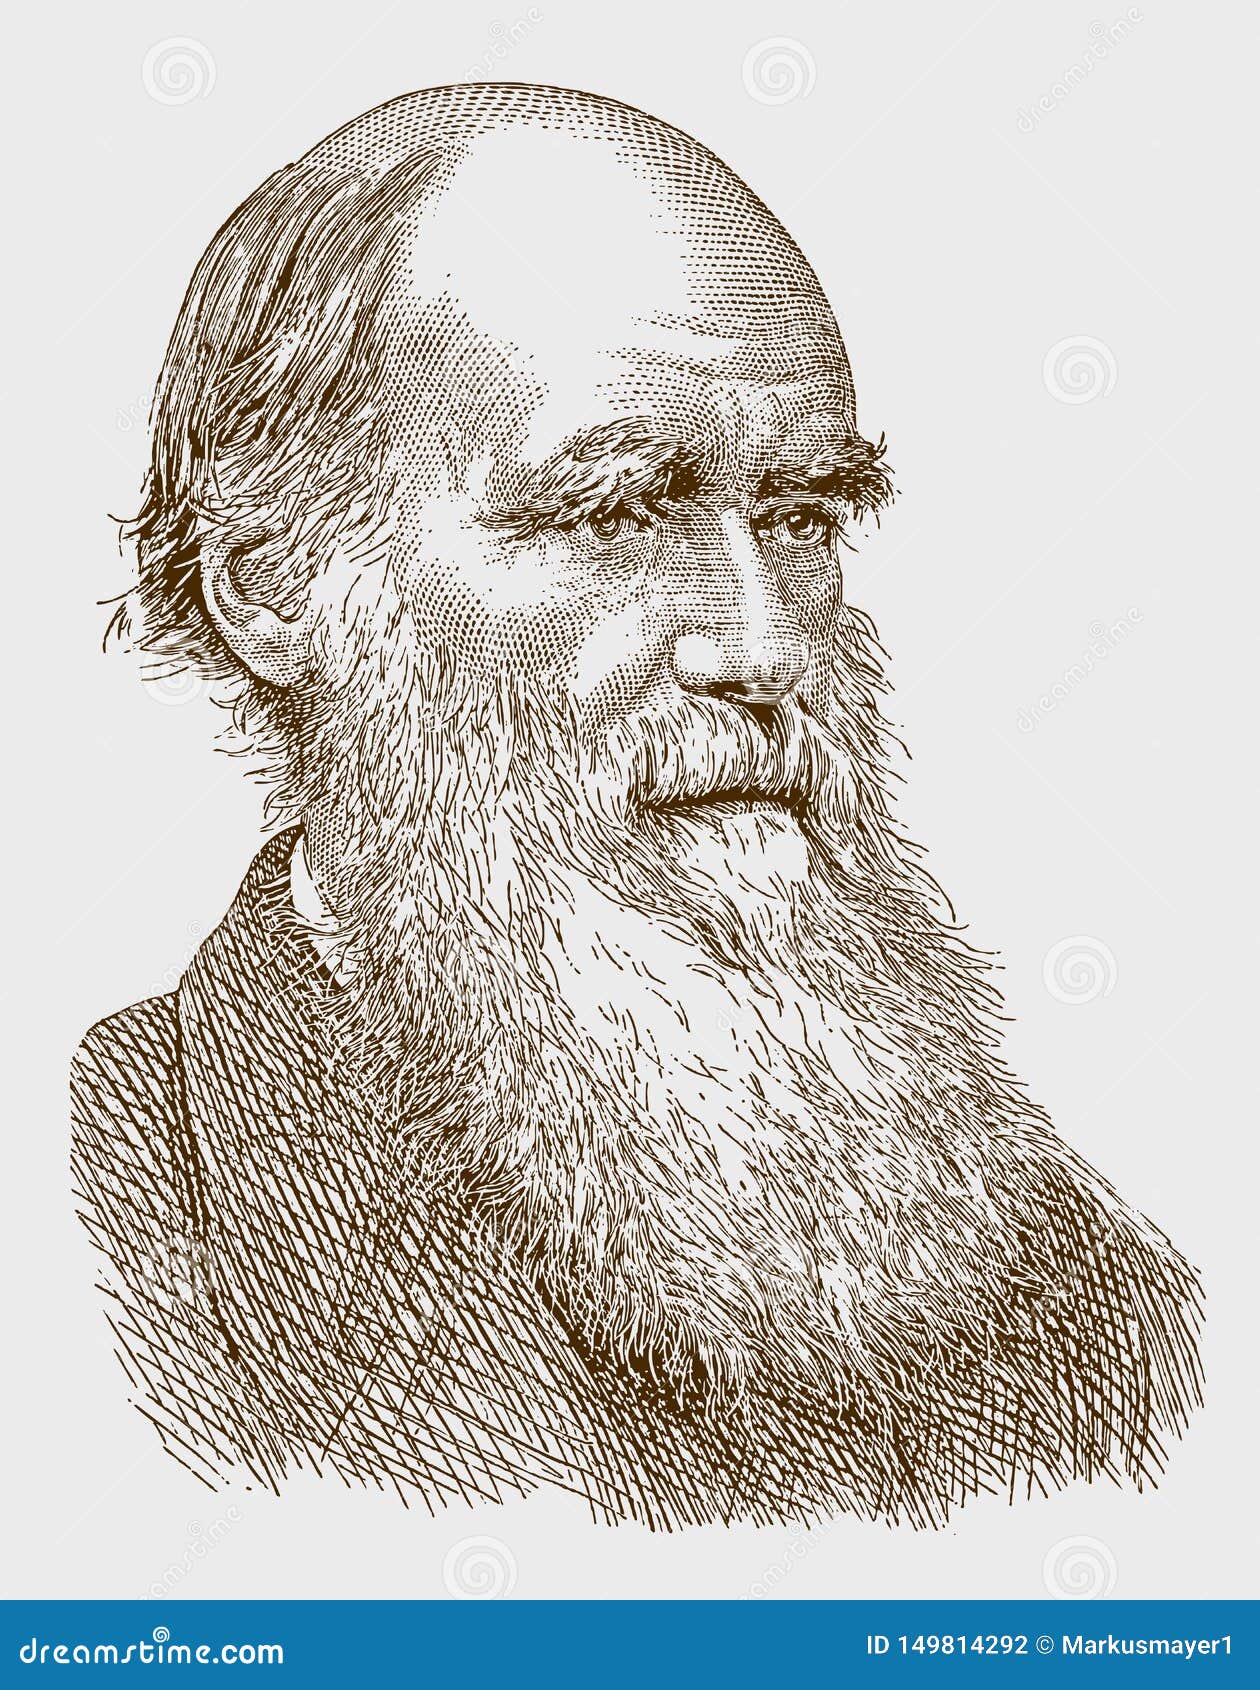 historical portrait of charles darwin the famous scientist with a long beard